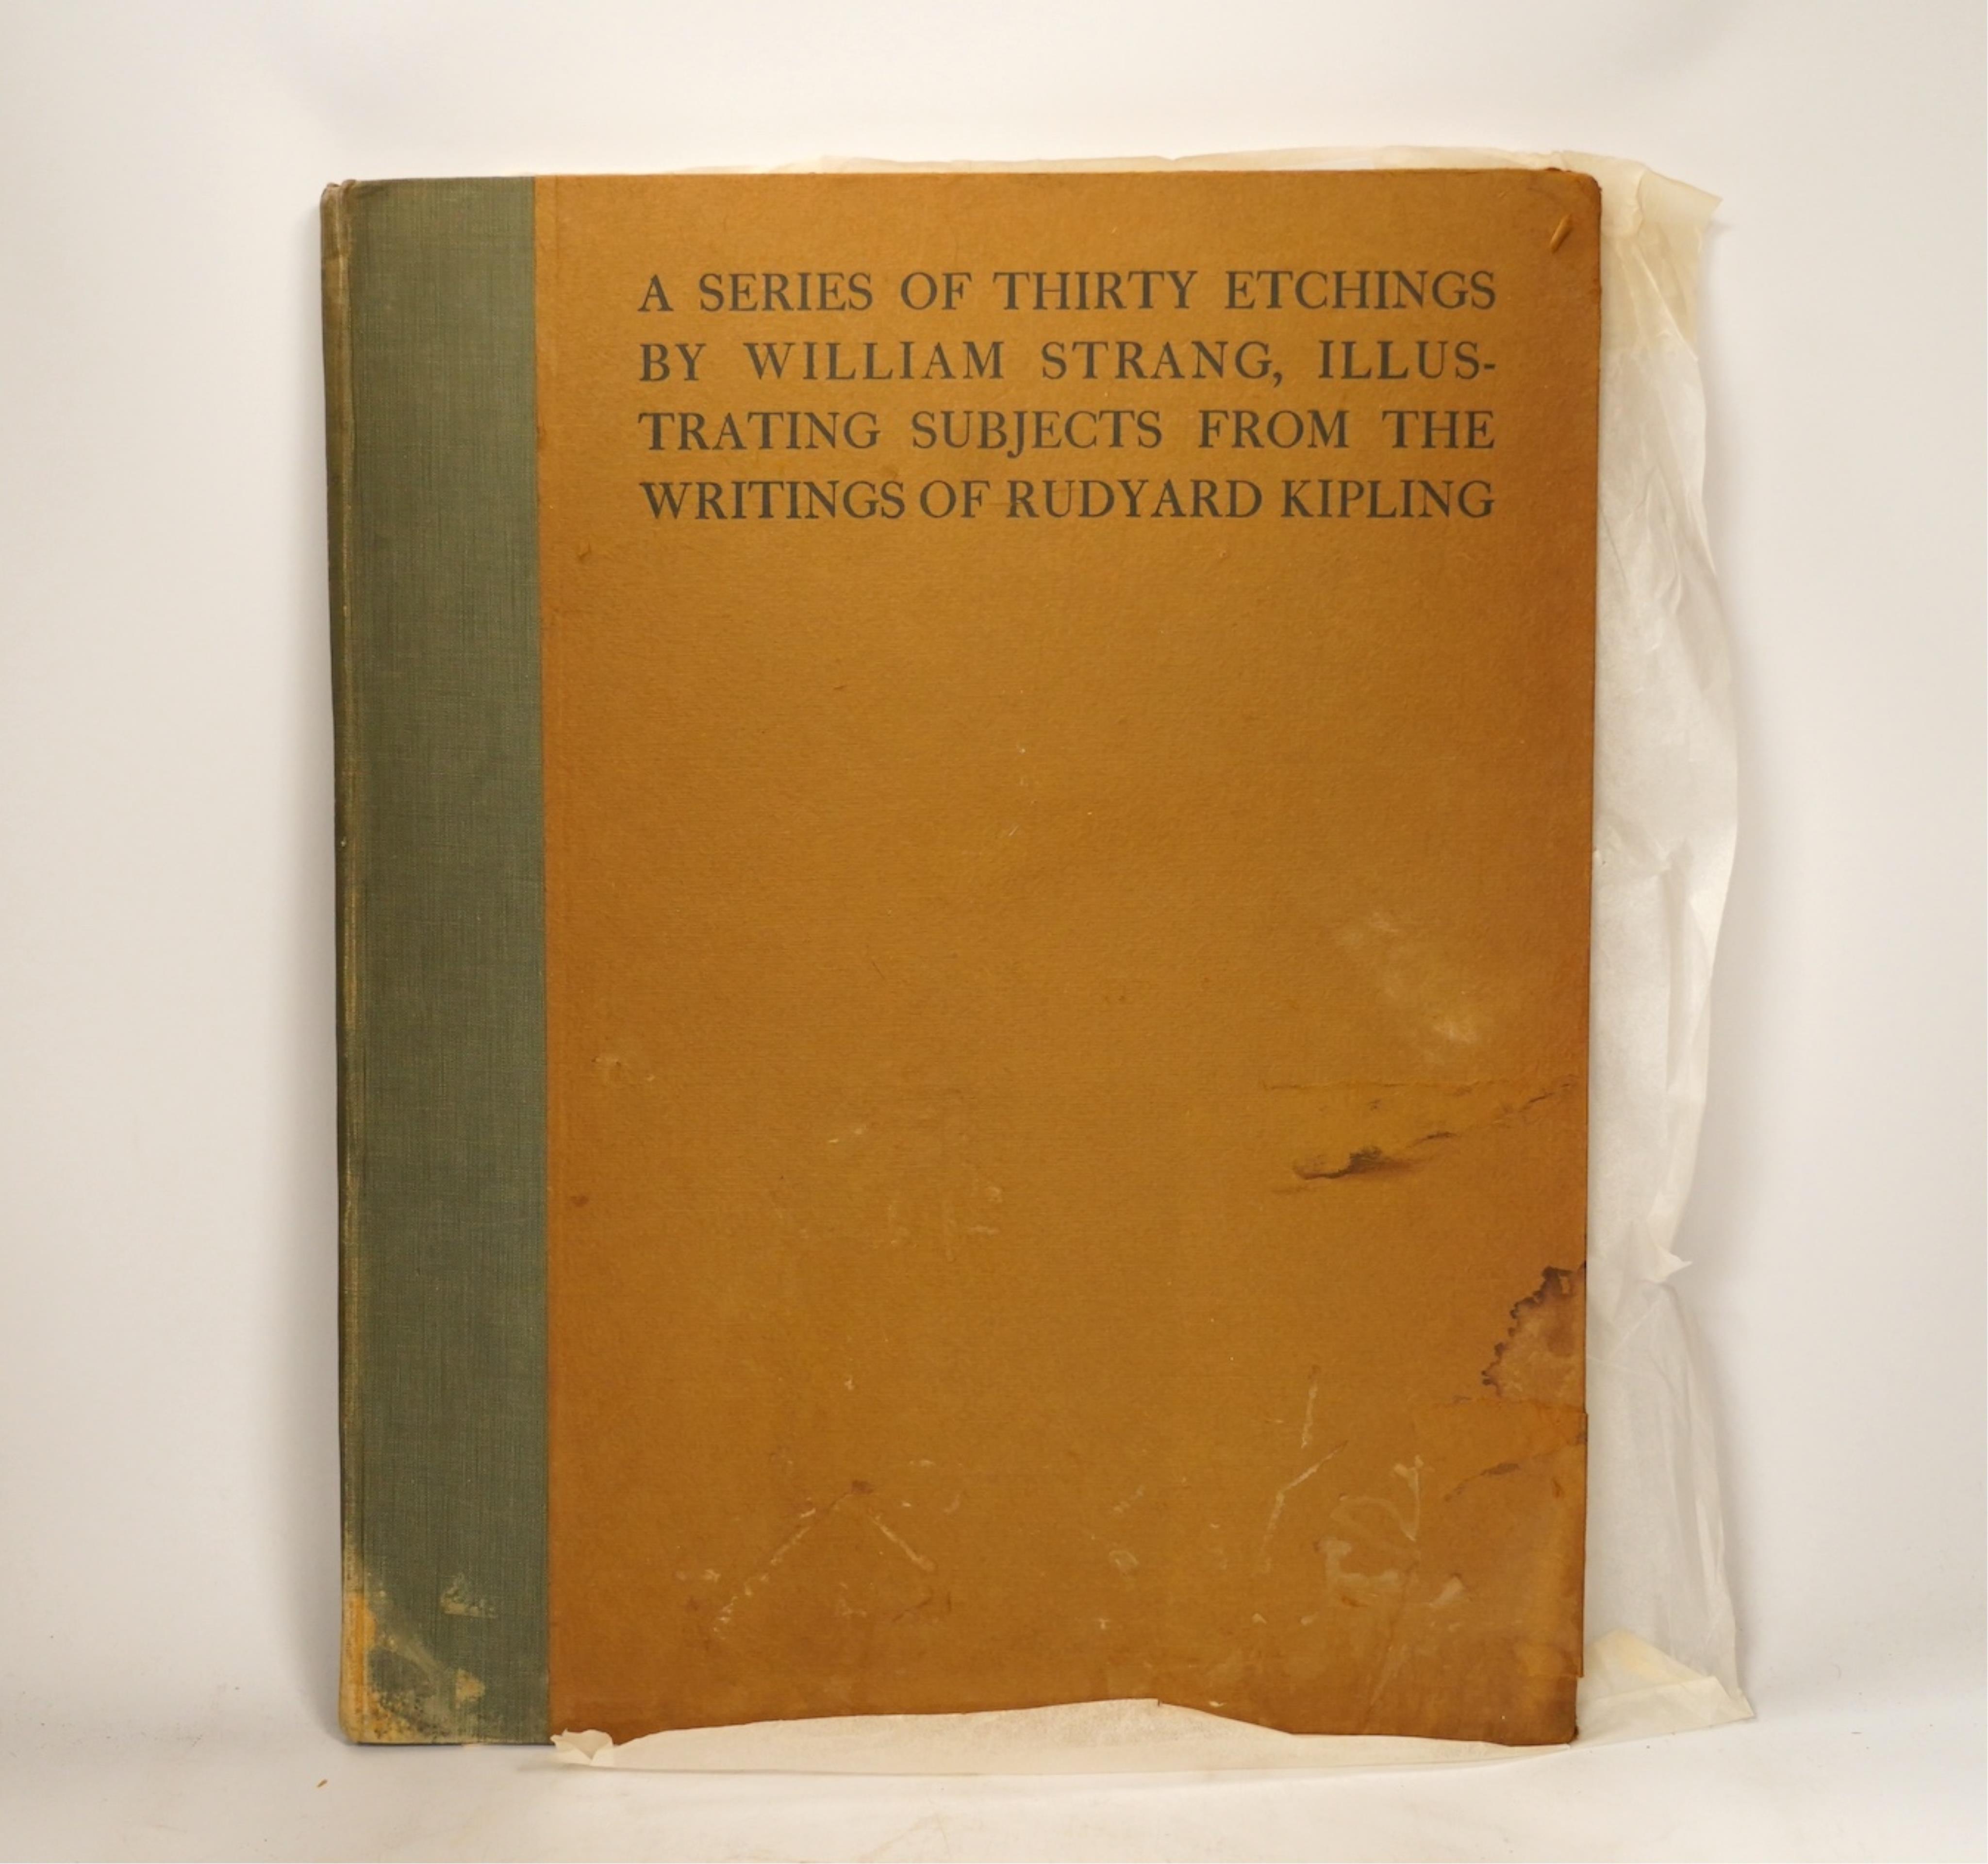 [Kipling, Rudyard], Strang William, A Series of Thirty Etchings, Illustrating Subjects from the Writings of Rudyard Kipling, Macmillan, 1901, 44 x 35cm. Condition - fair with foxing and staining